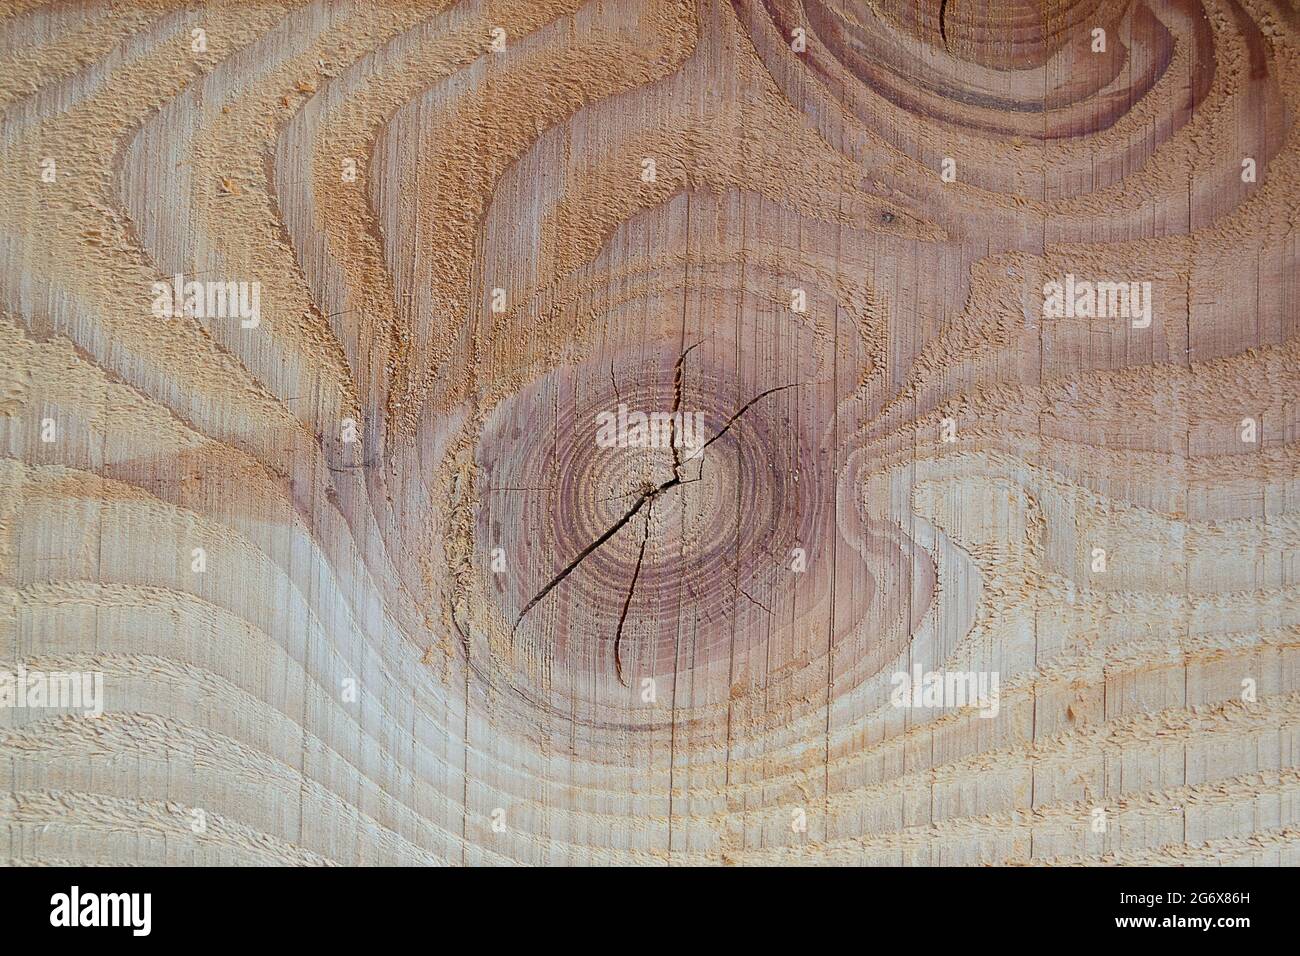 Close-up of a knot in a douglas fir plank Stock Photo